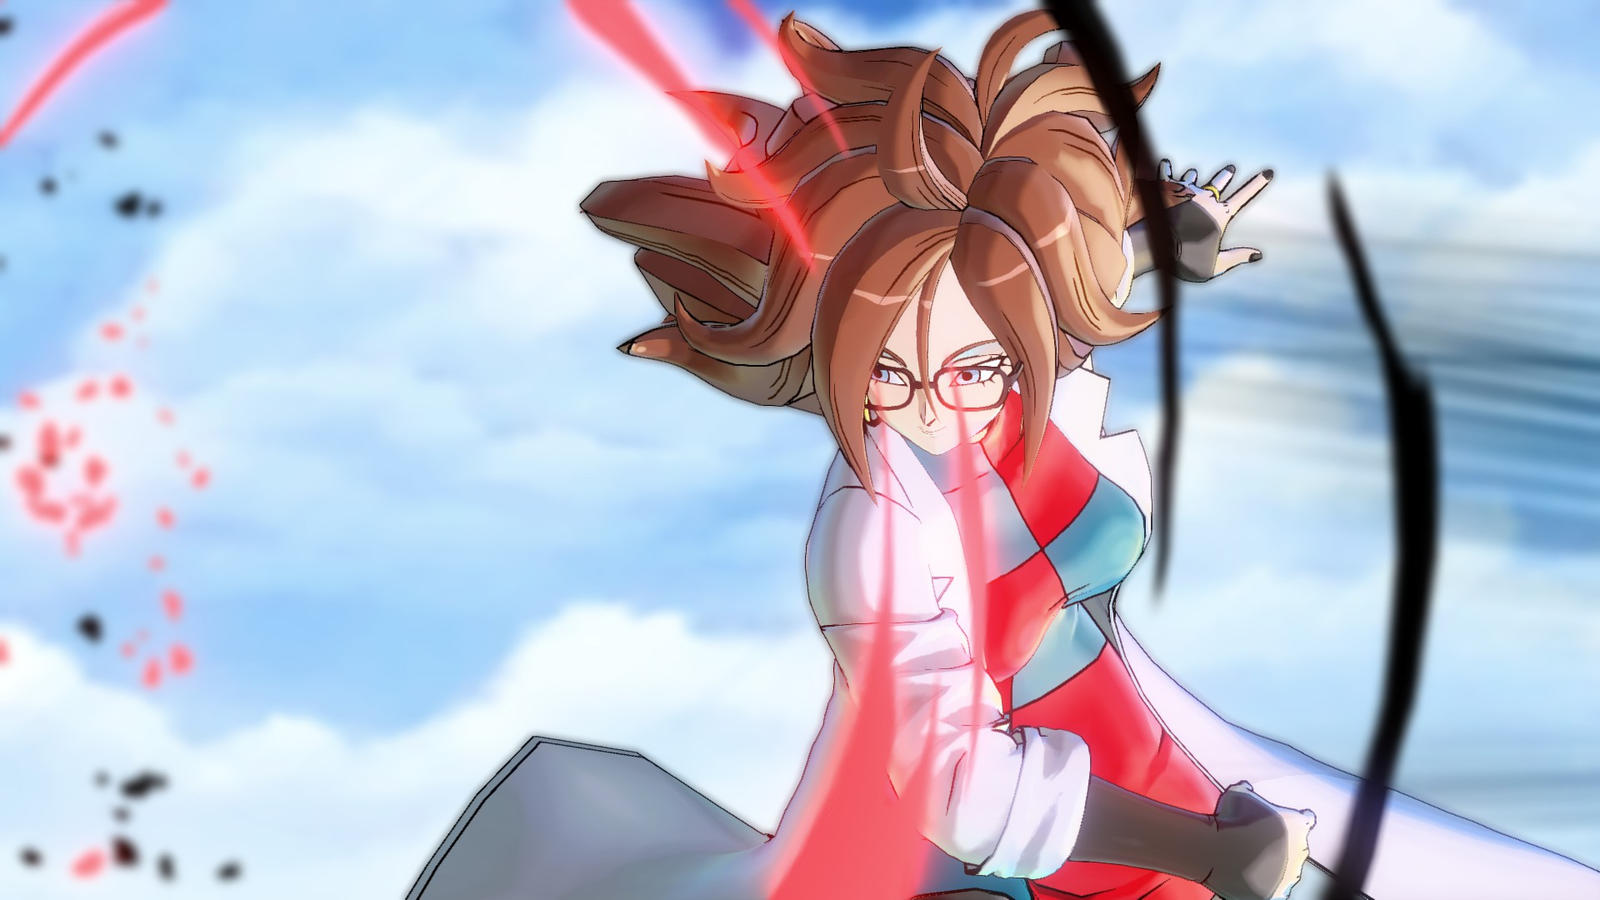 xenoverse 2 Android 21 final flash by lordLKkamikaze on DeviantArt